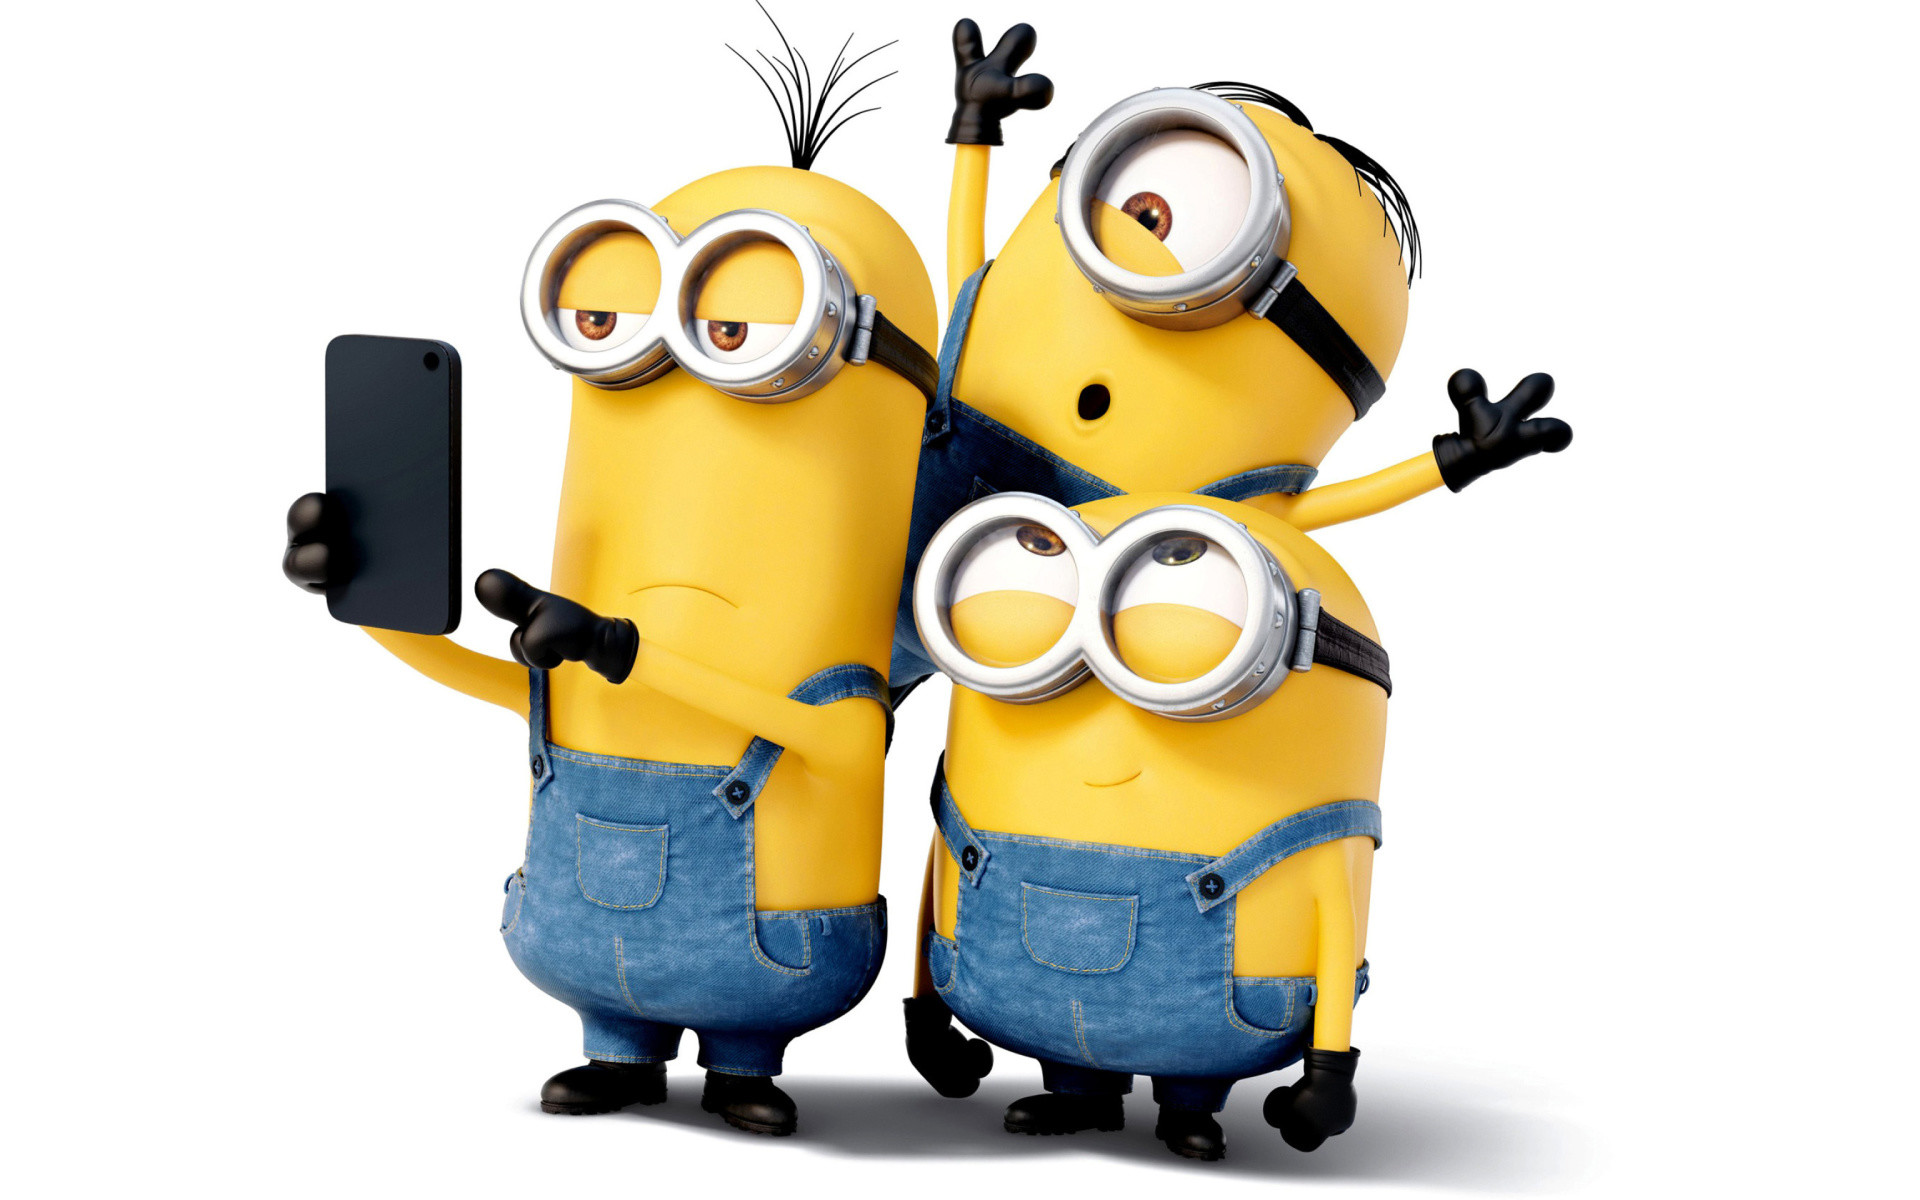 Cute Funny Minions Wallpapers, Backgrounds